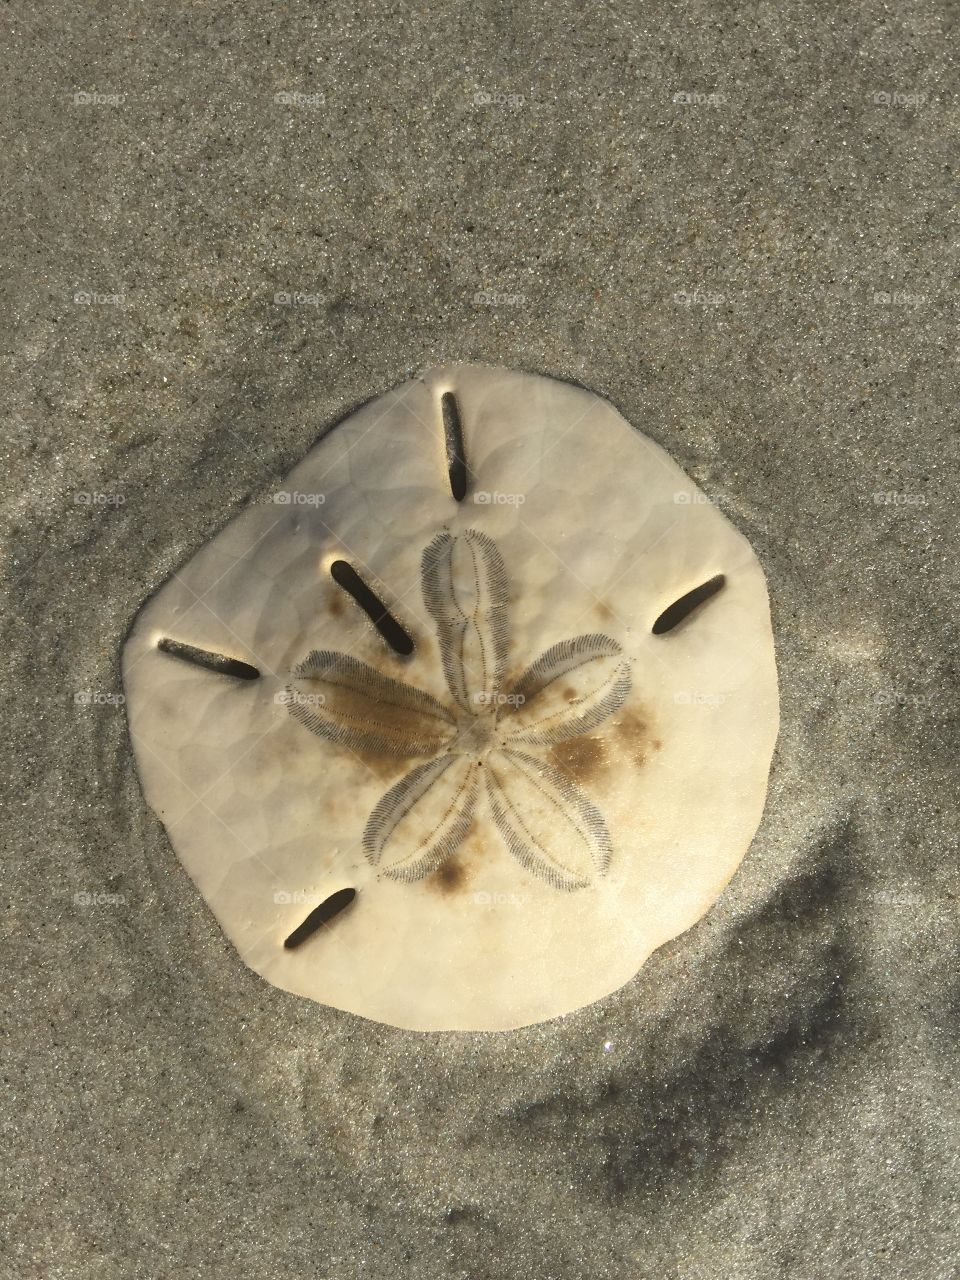 Beautiful sand dollar I found along the beach in the sand in Wildwood crest NJ